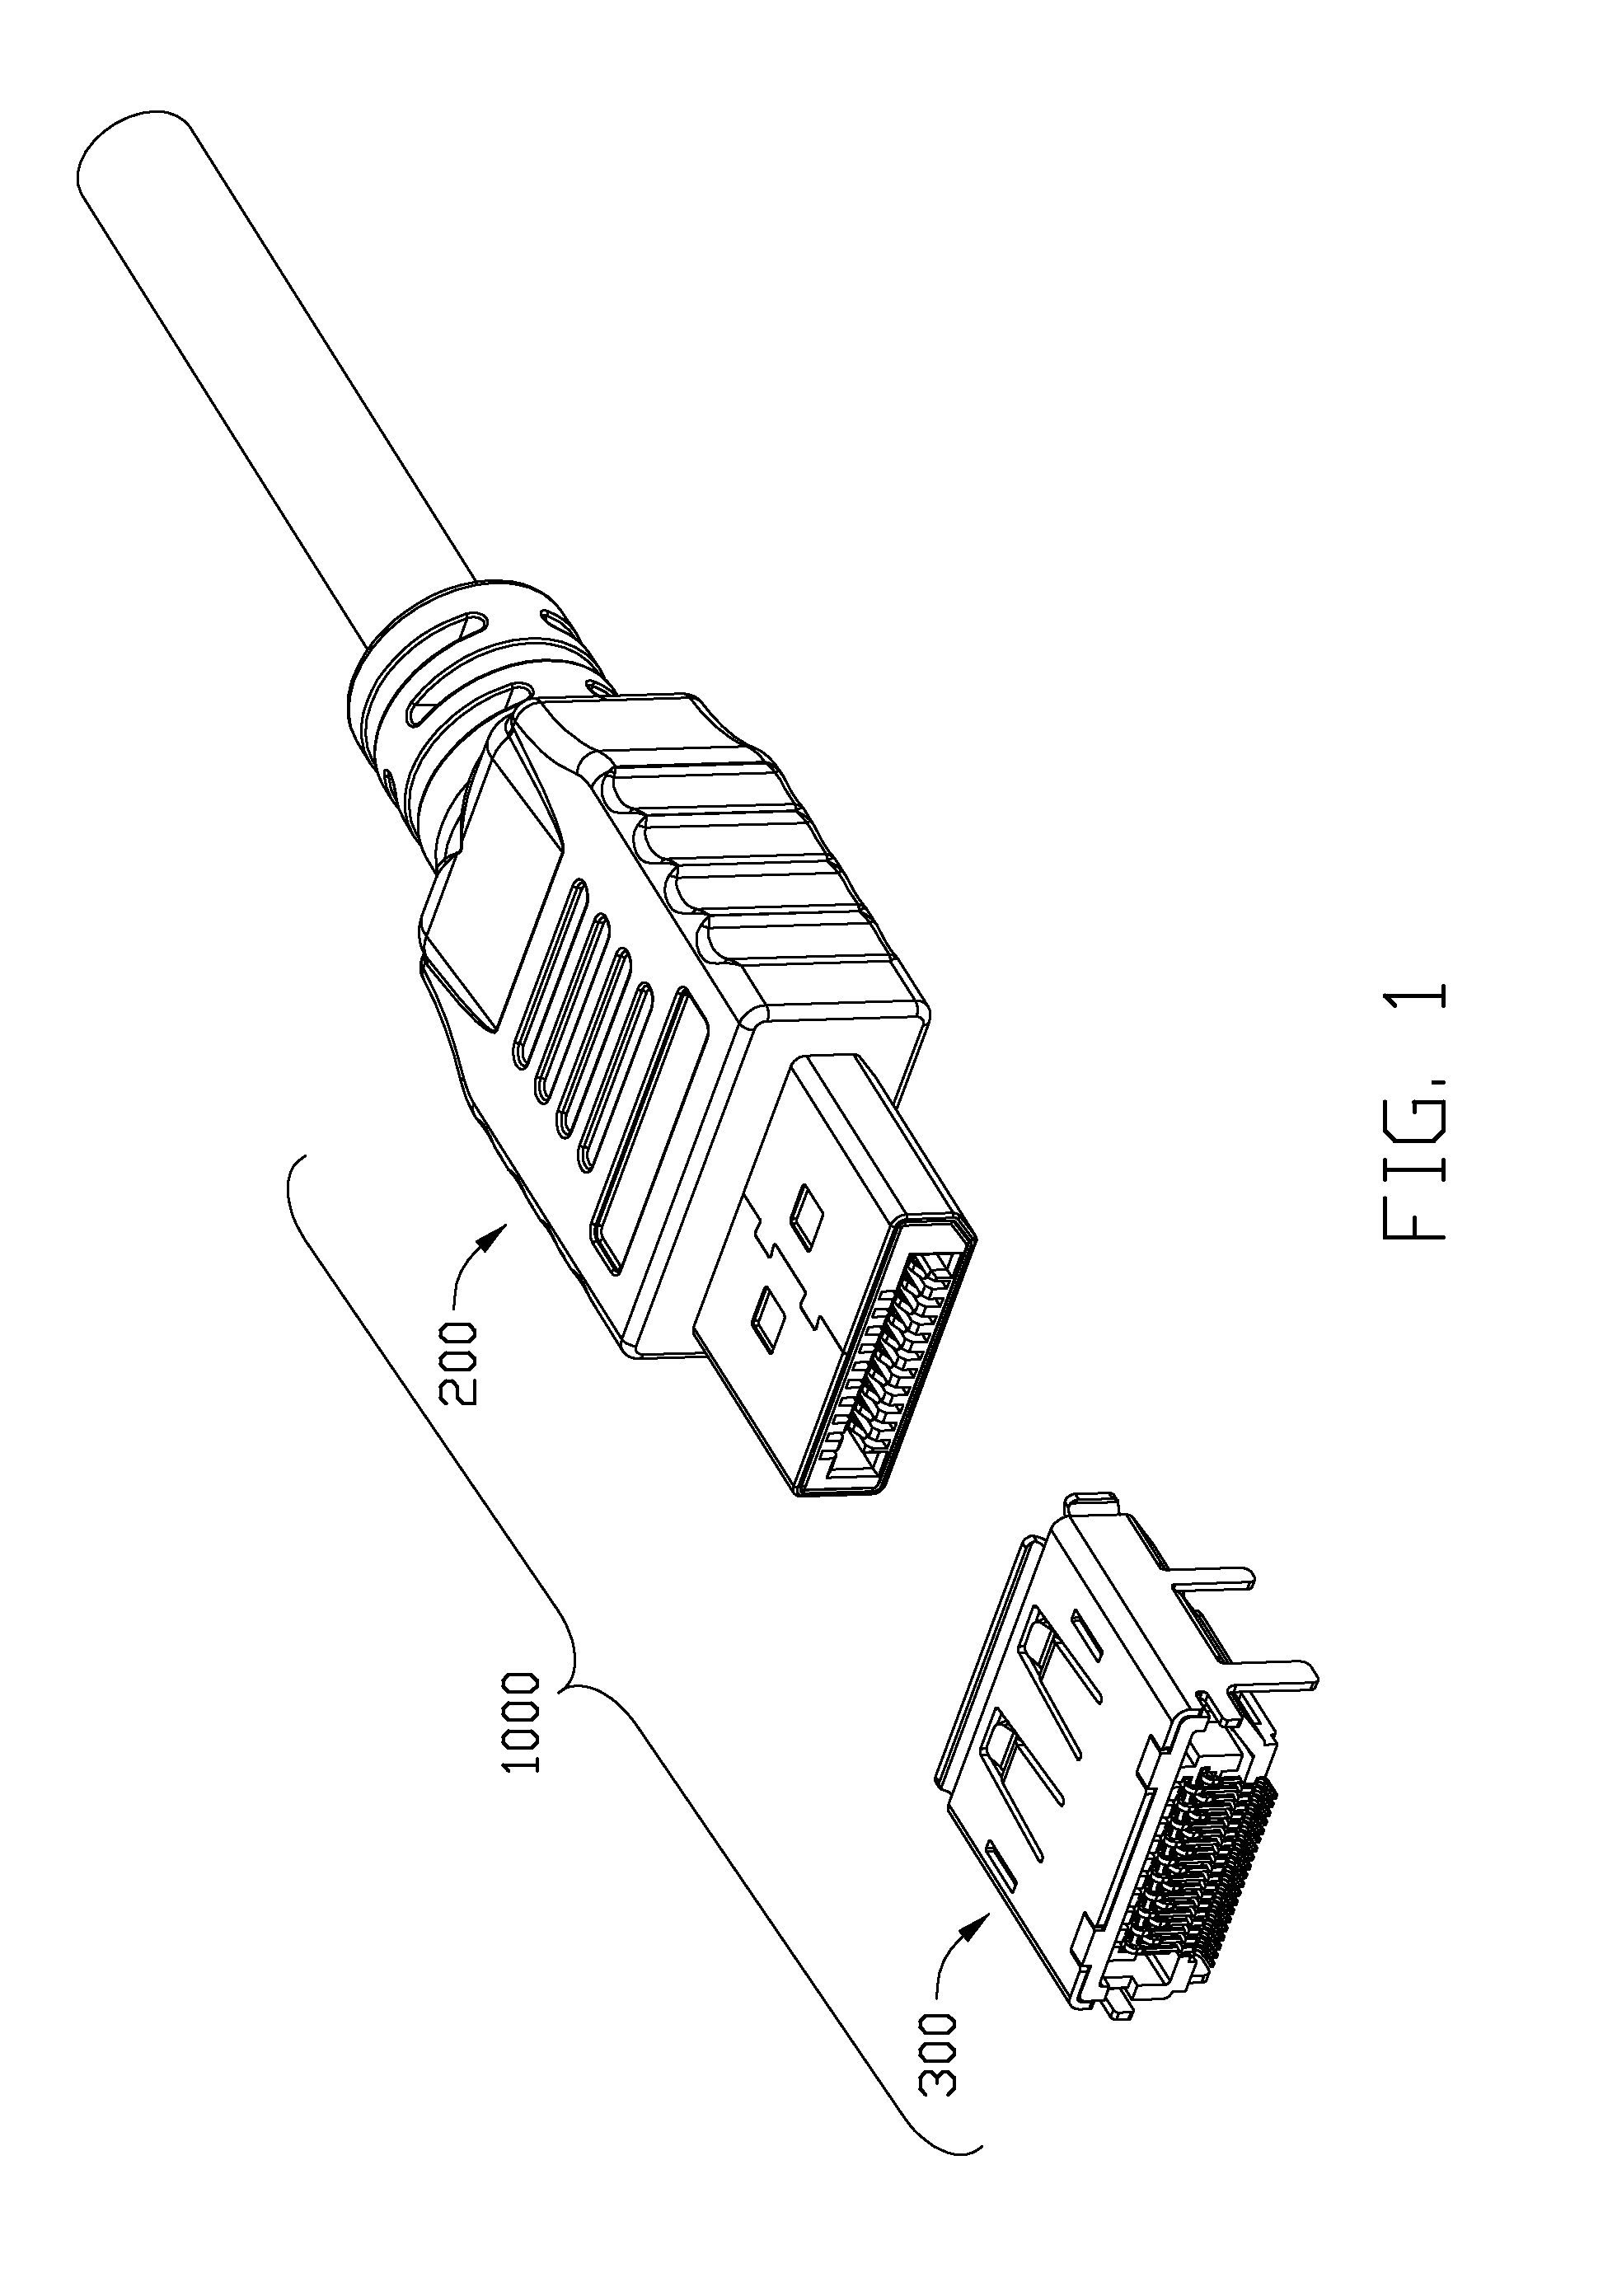 Electrical connector with improved contacts